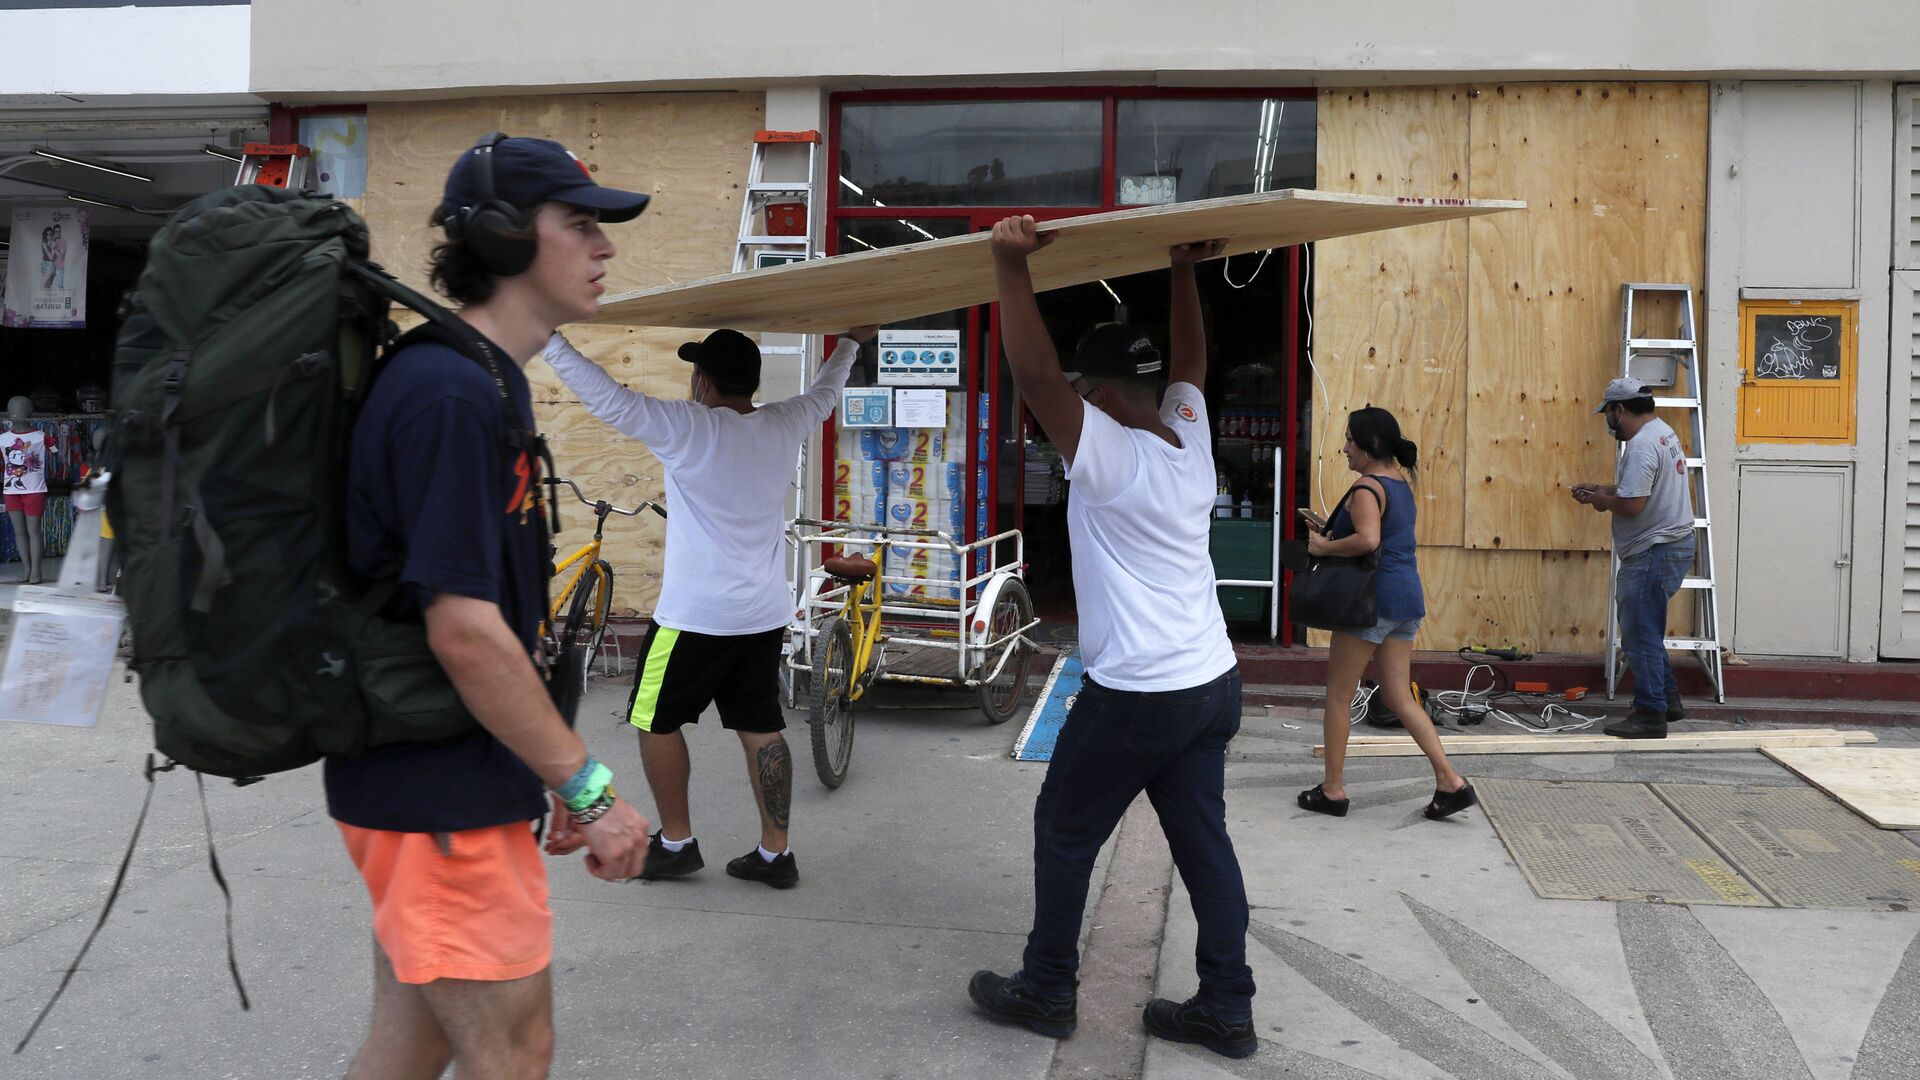 Workers cover shop windows with plywood in Tulum, Quintana Roo State, Mexico, Wednesday, Aug. 18, 2021. Residents and tourists along the Caribbean coast began making preparations for Grace, a storm that drenched Haiti and Jamaica and is now forecast to hit Mexico´s Yucatan peninsula like a hurricane early Thursday morning. - Sputnik International, 1920, 19.08.2021